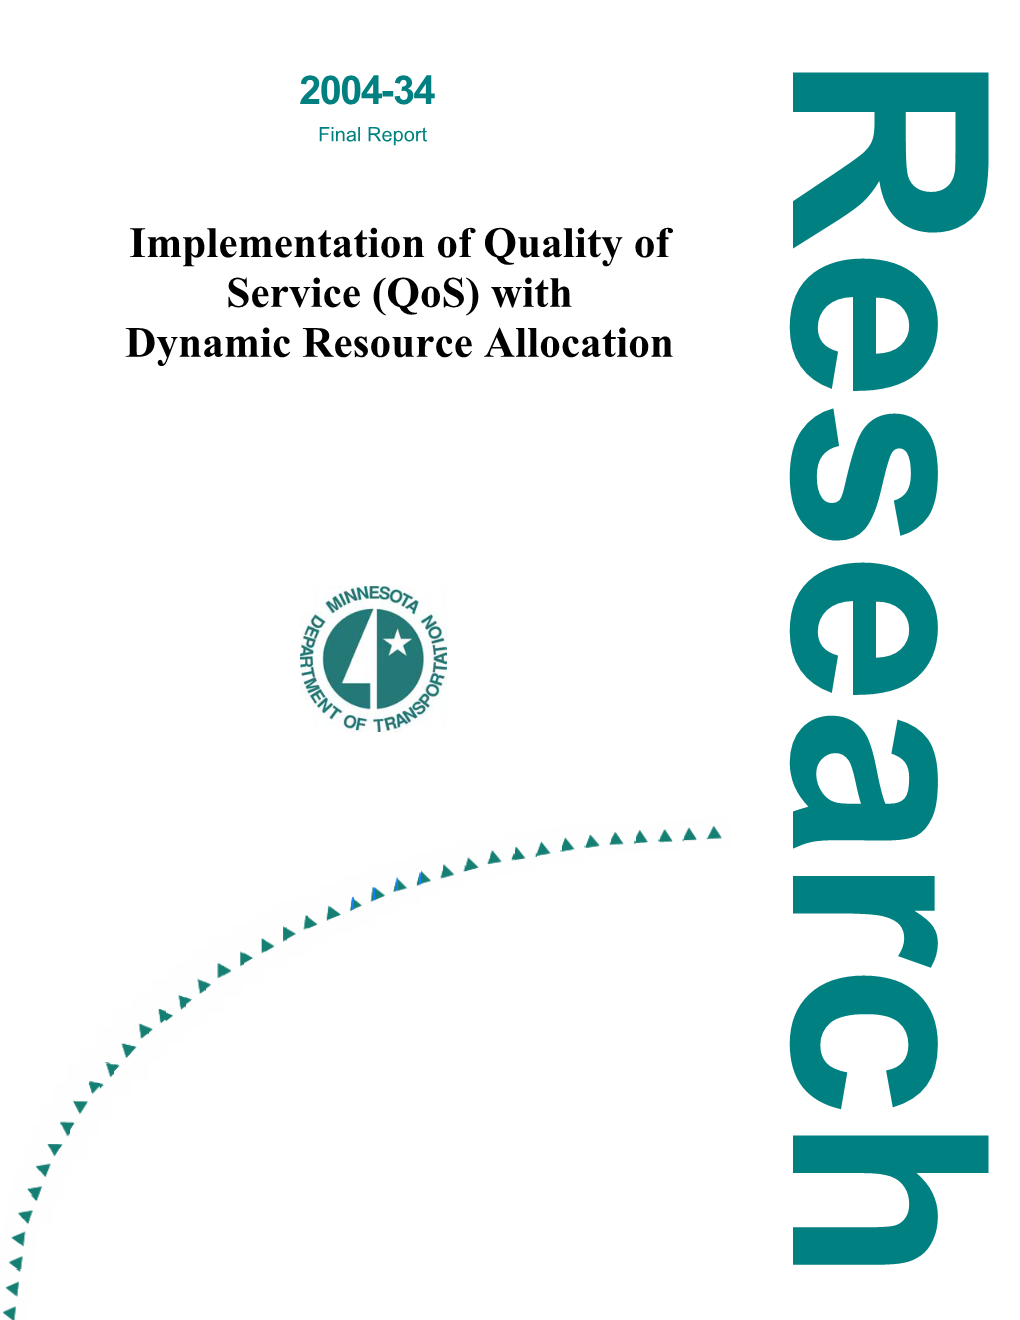 Implementation of Quality of Service (Qos) with Dynamic Resource Allocation